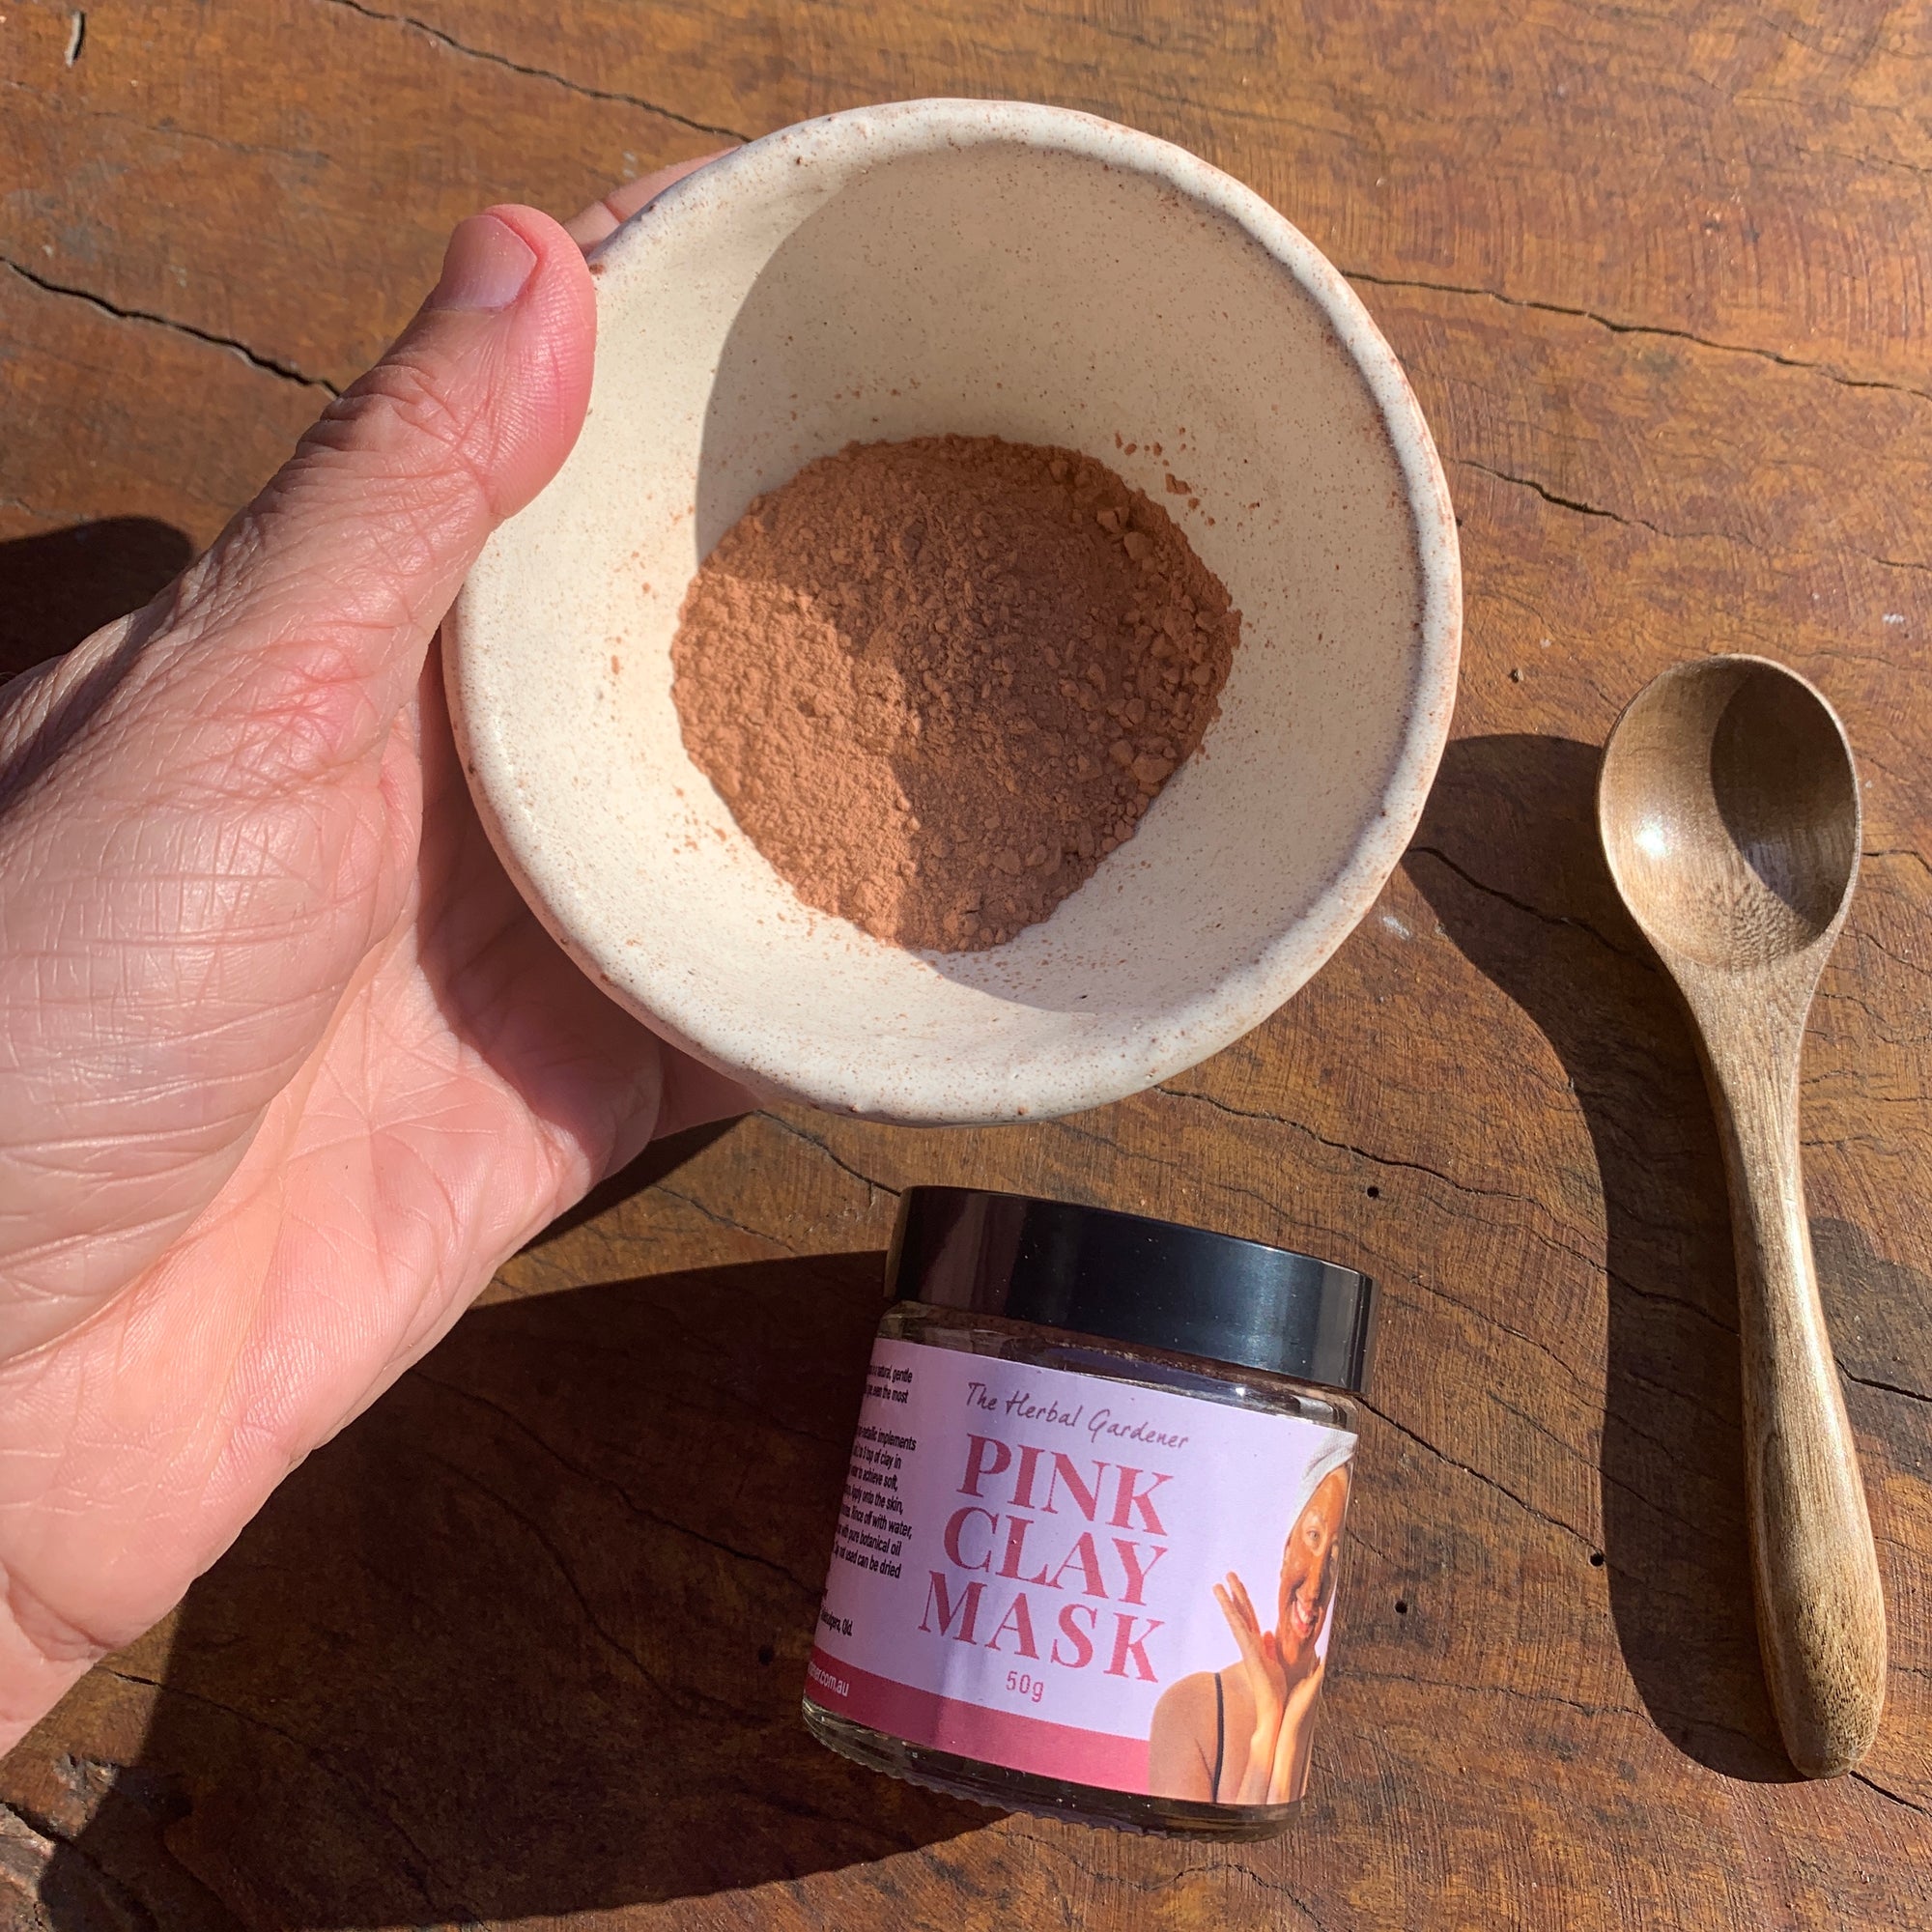 Pink Clay Mask with limited edition pottery bowl